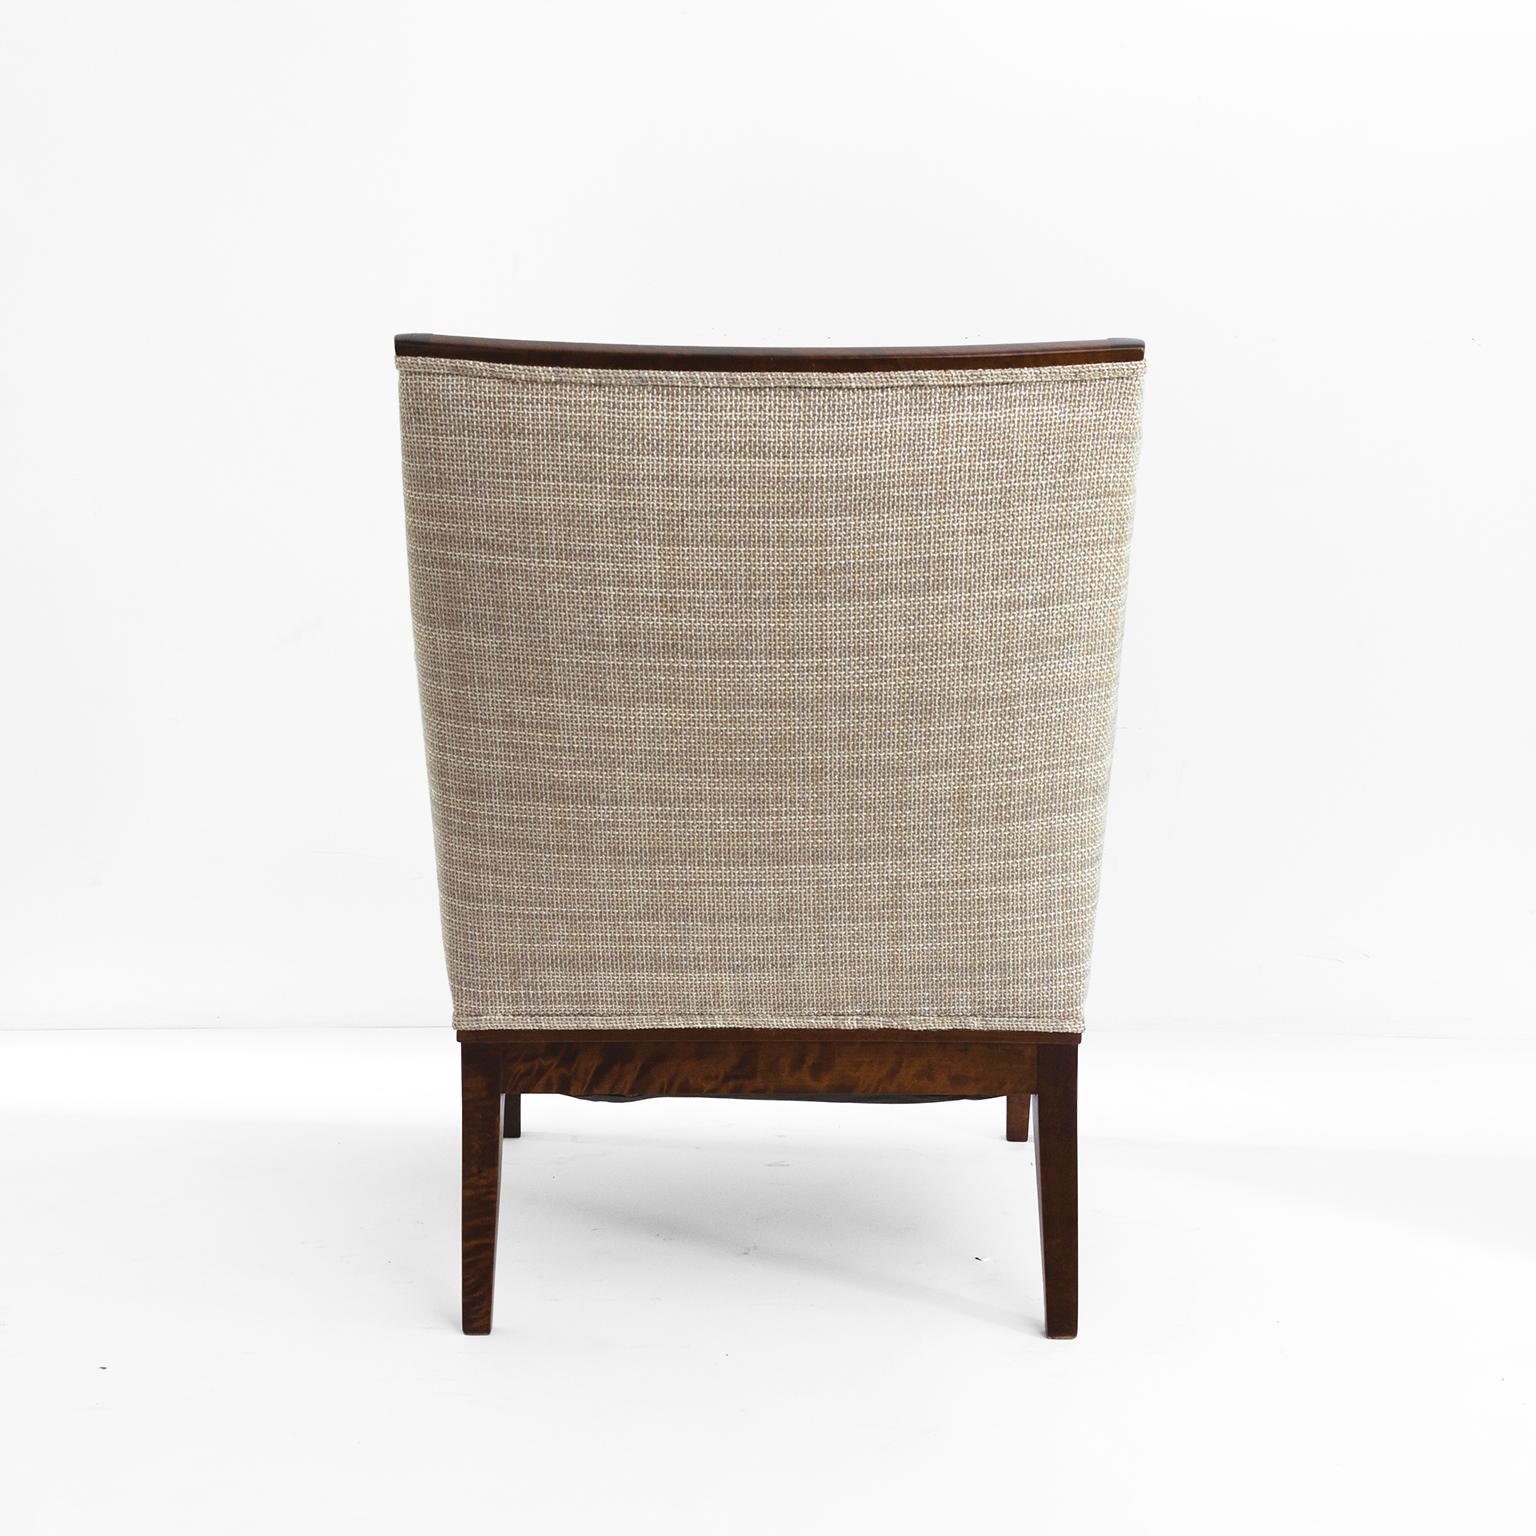 Fabric Swedish Armchairs in Stained Solid Birch, by SFM Bodafors, circa 1930 For Sale